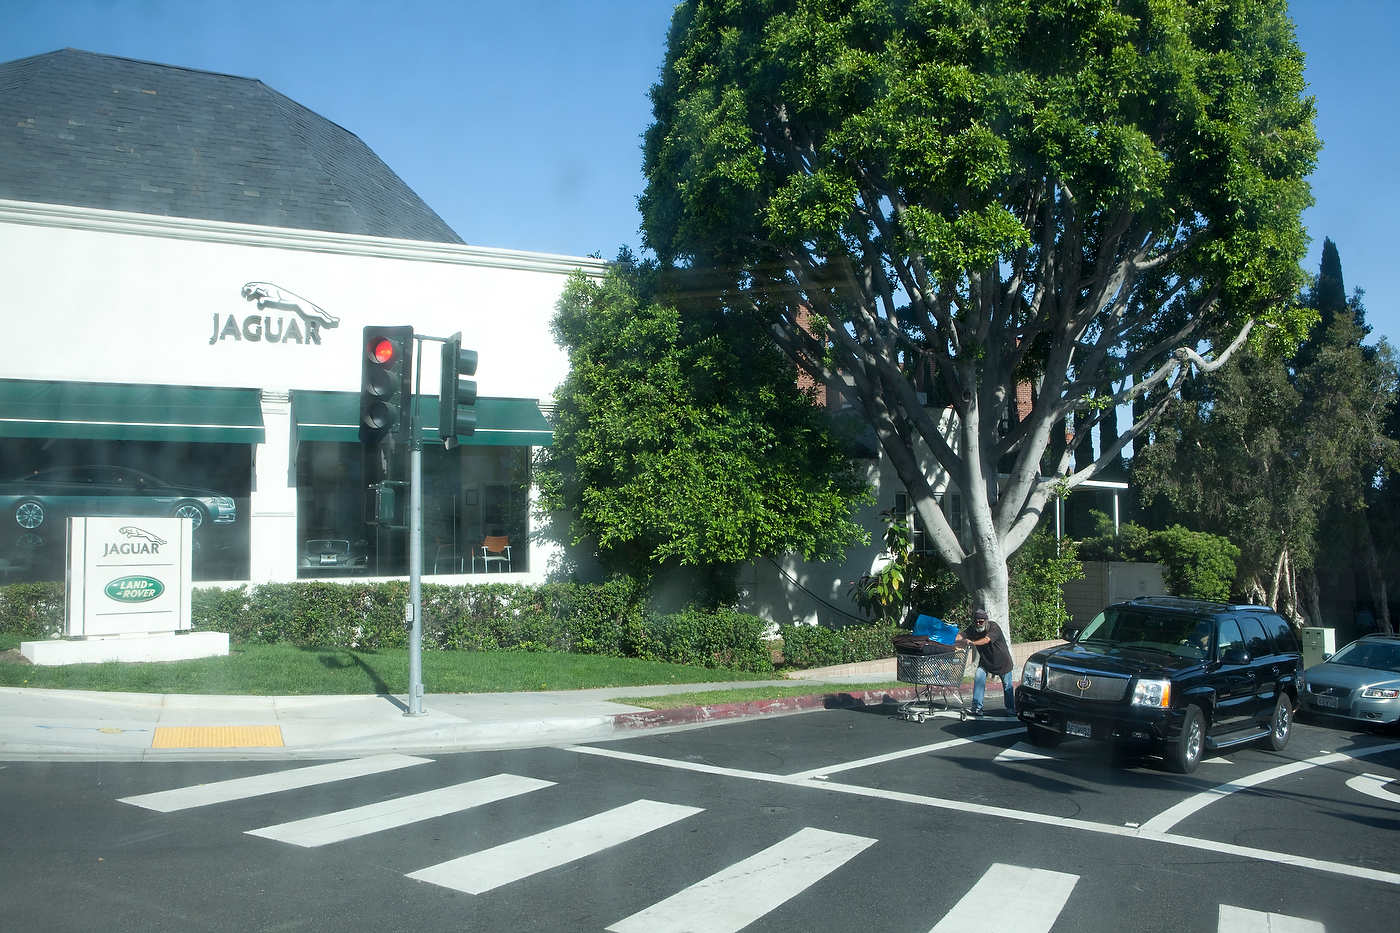 Cadillac and shopping cart at red light, Sunset Boulevard, Line 302.